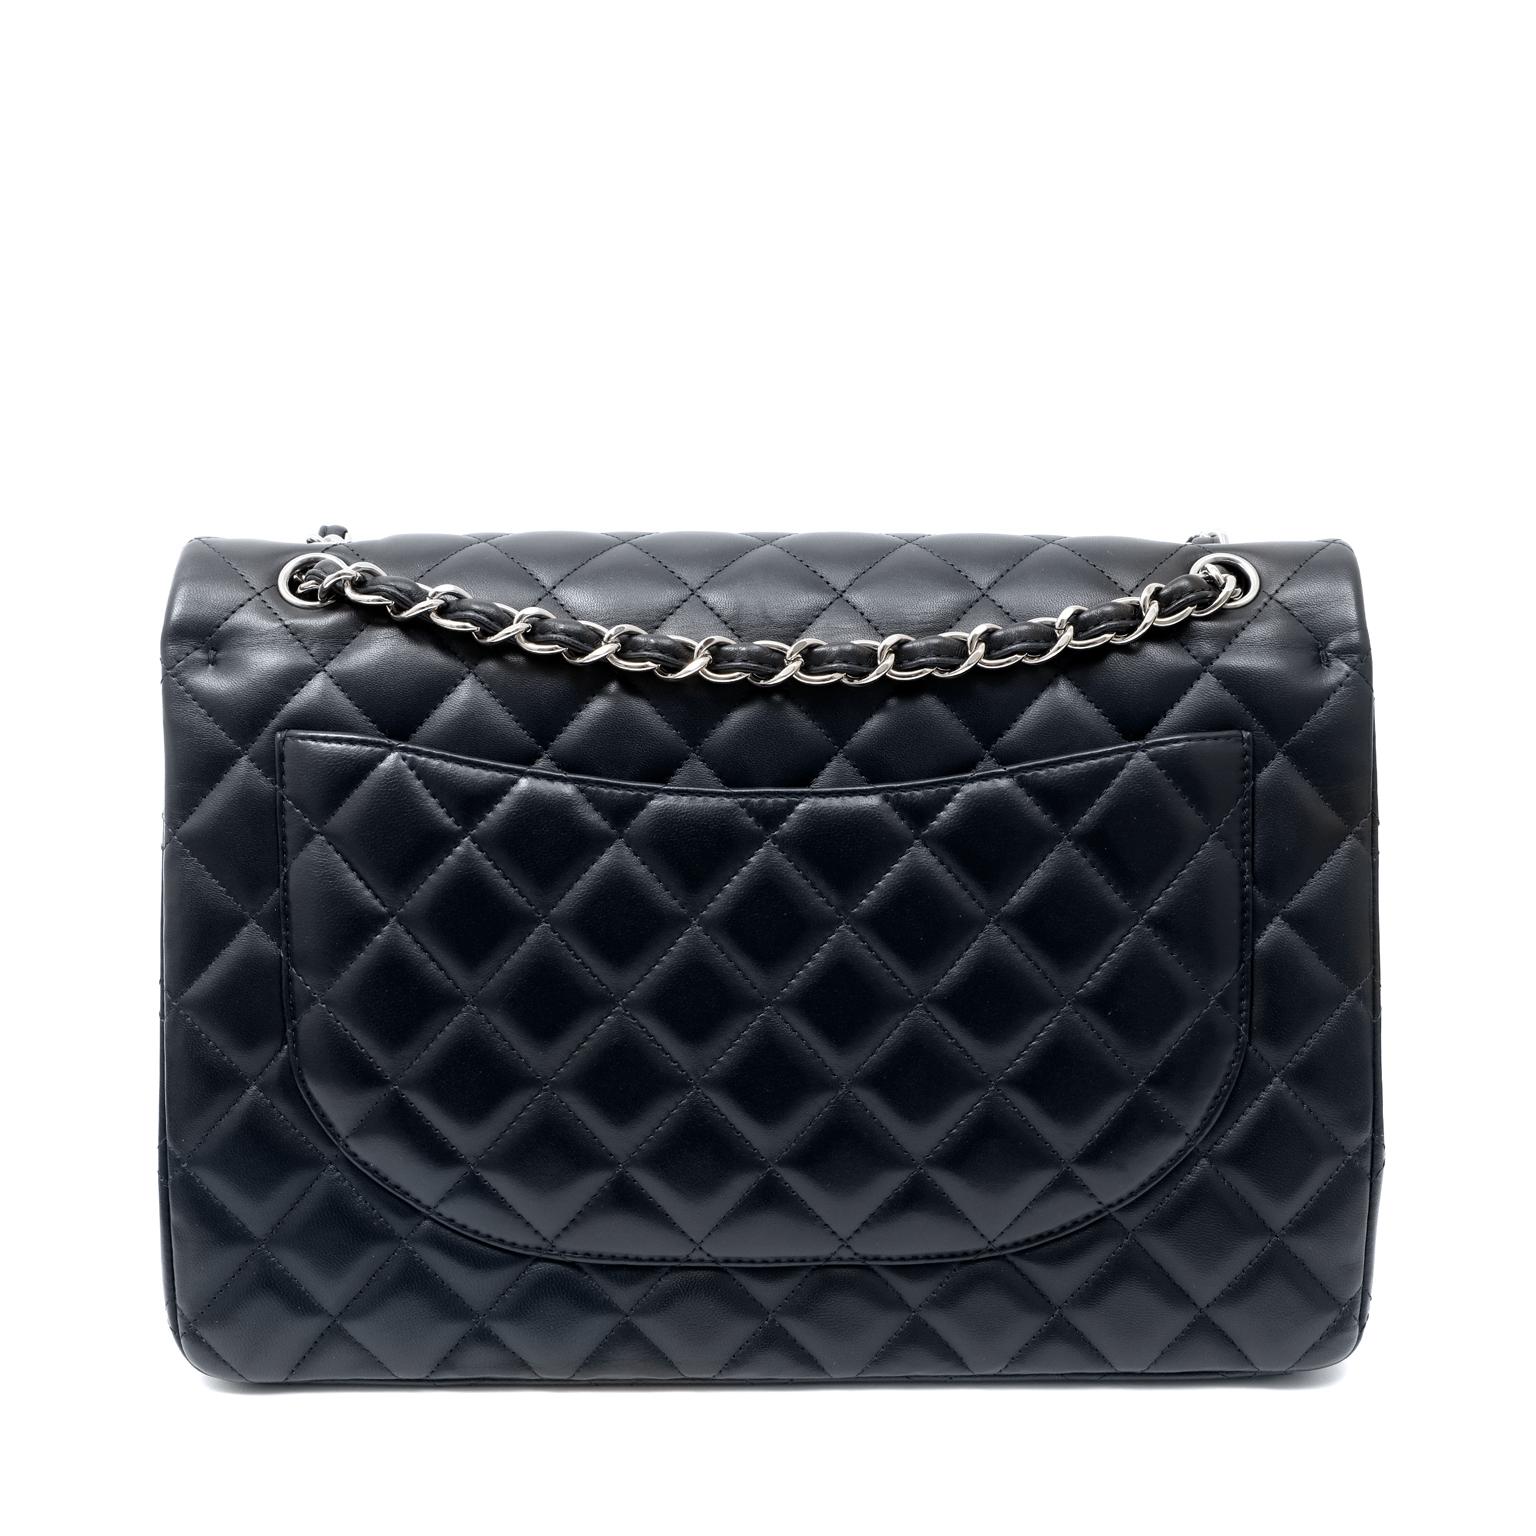 This authentic Chanel Navy Lambskin Maxi Flap Bag is in pristine condition.  In a very deep shade of navy, it appears nearly black.  This adds to the versatile nature of the classic Maxi.
Deep navy blue lambskin is quilted in signature Chanel